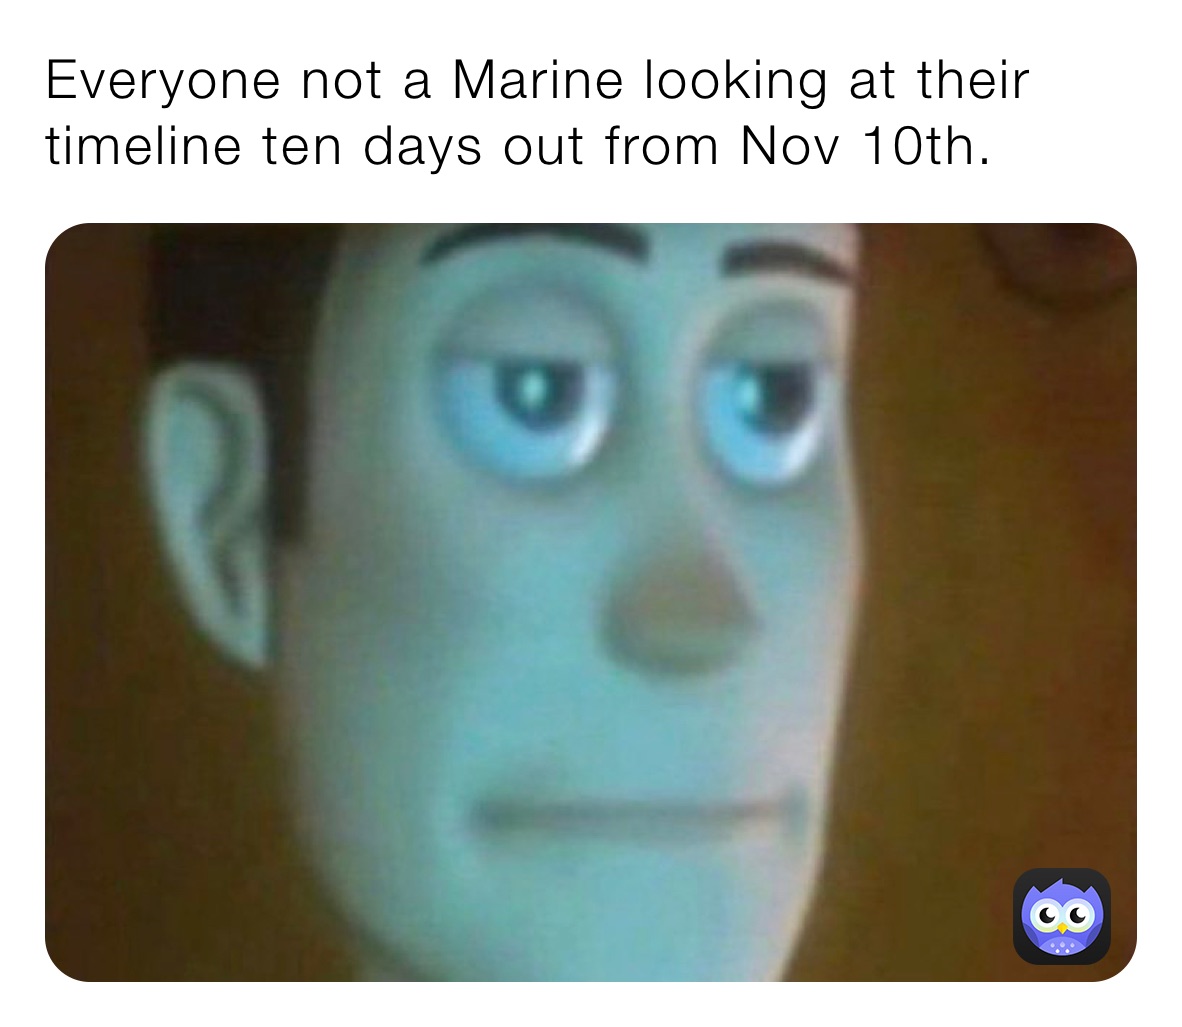 Everyone not a Marine looking at their timeline ten days out from Nov 10th.